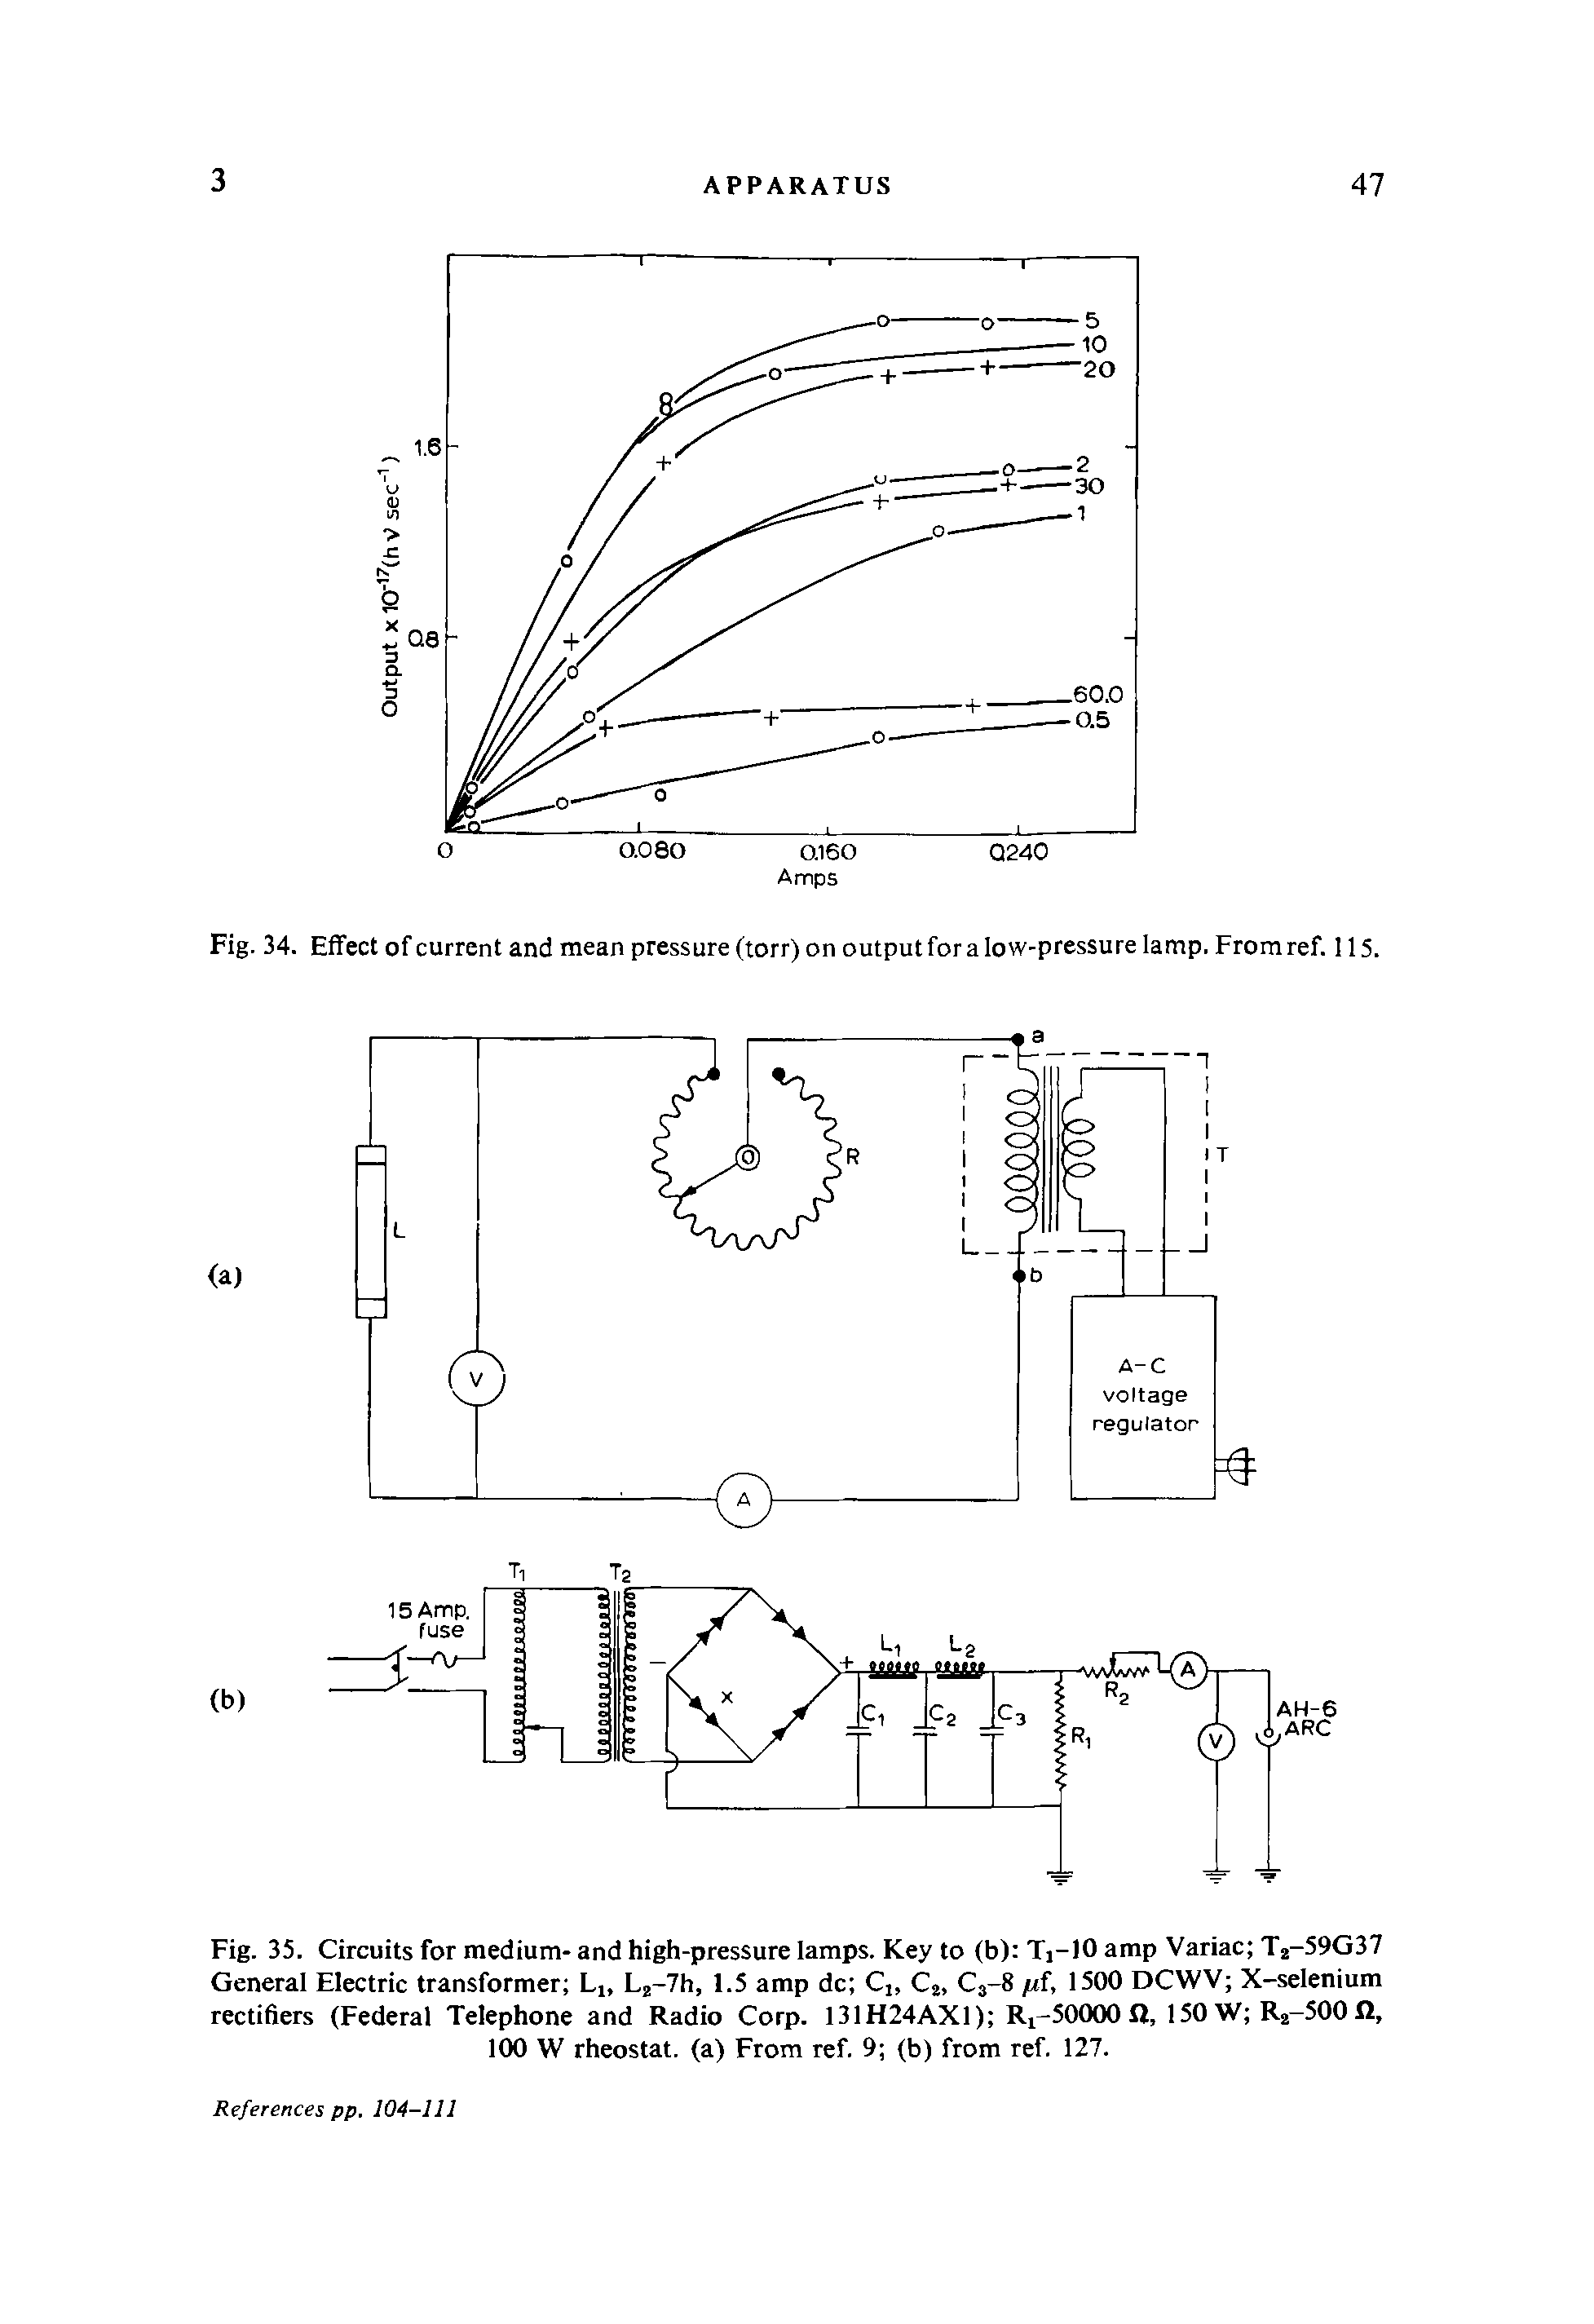 Fig. 34. Effect of current and mean pressure (torr) on output for a low-pressure lamp. From ref. 115.